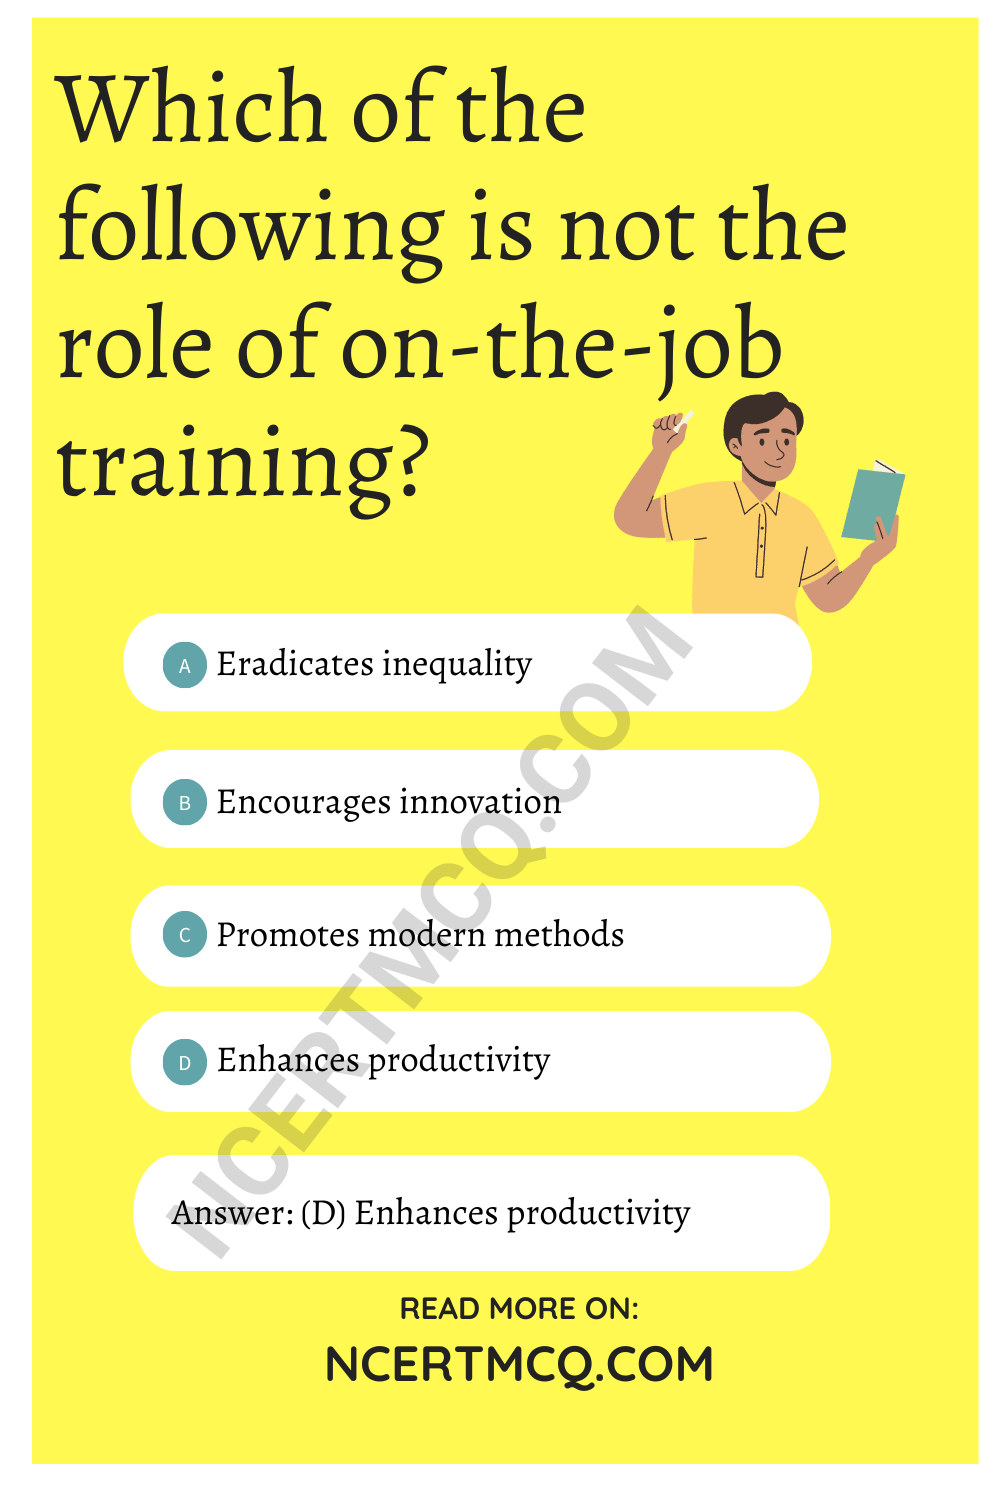 Which of the following is not the role of on-the-job training?